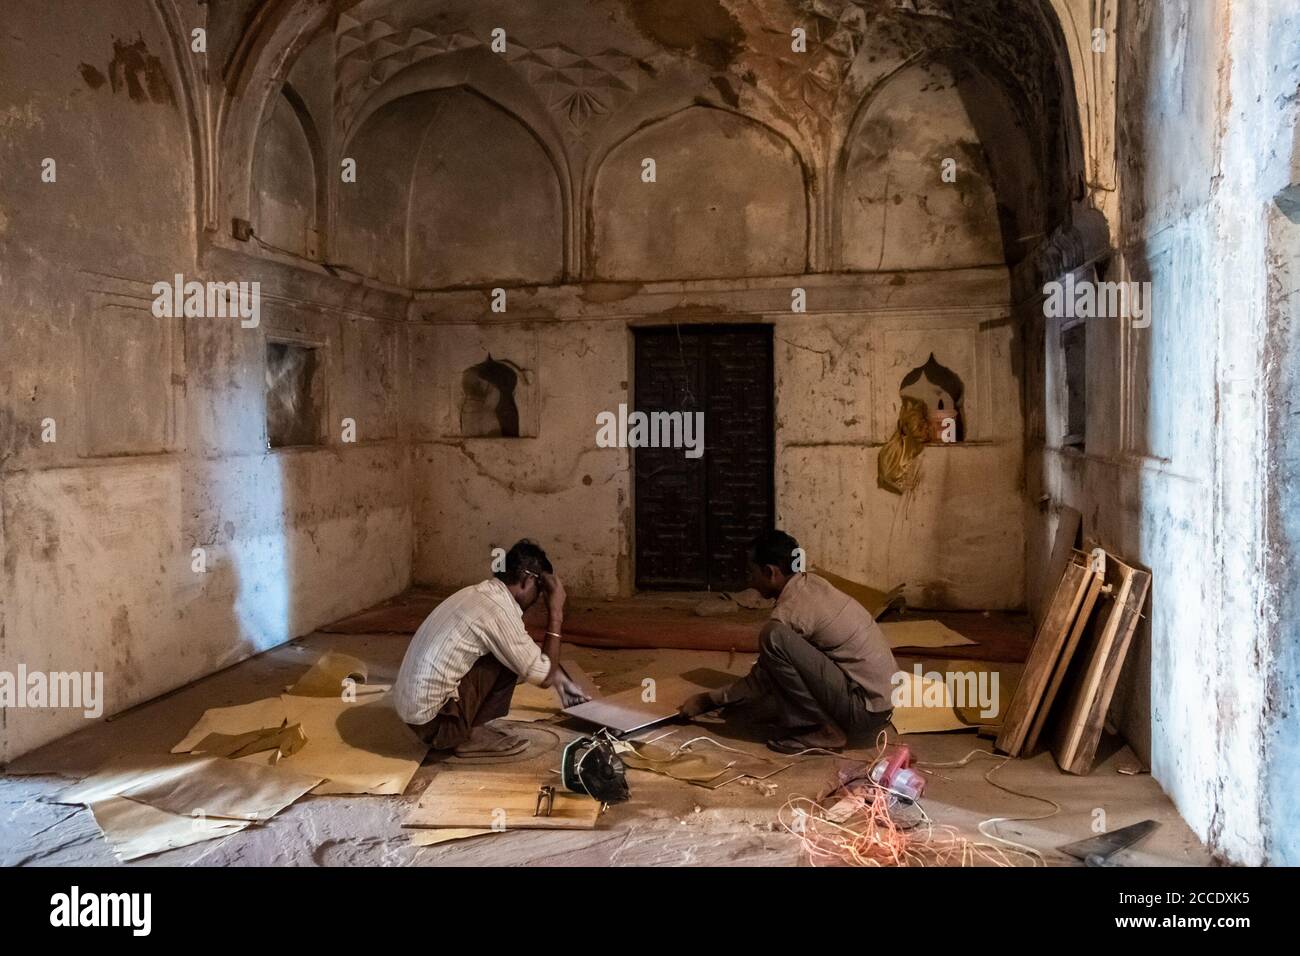 Orchha, Madhya Pradesh, India - March 2019: Carpenters doing restoration work inside a dark hall of the Jehangir Mahal palace in the Orchha Fort. Stock Photo